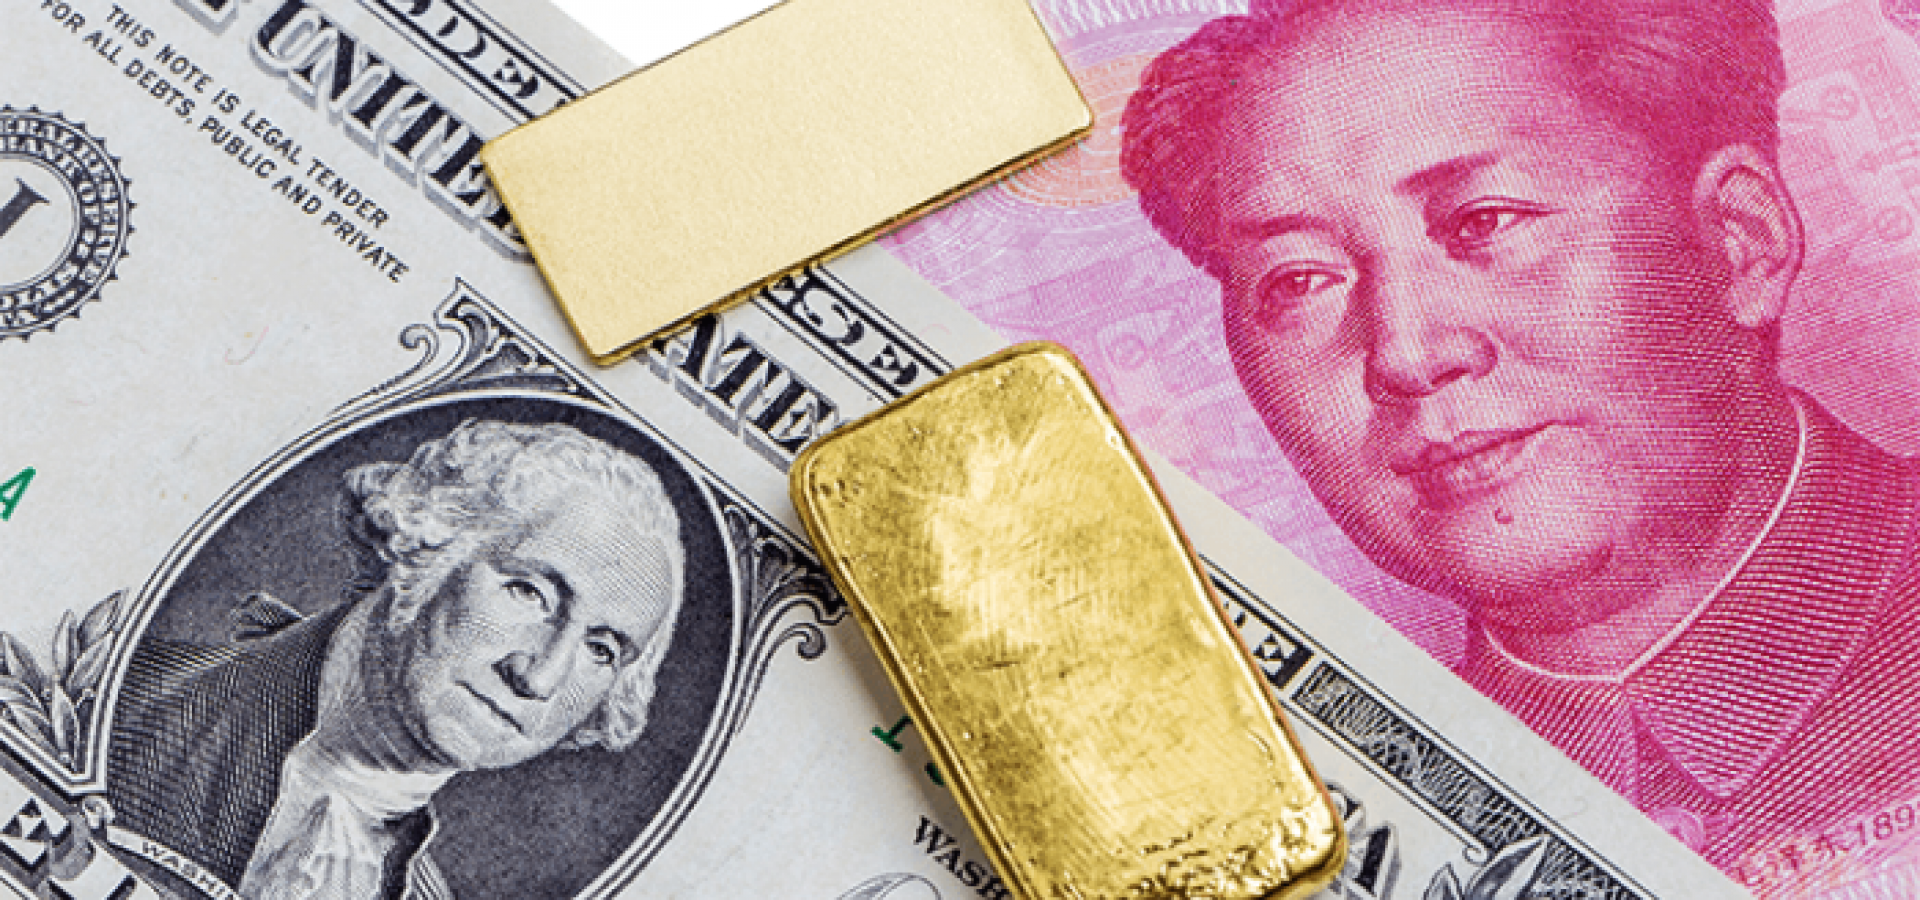 Gold and tensions between U.S. and China